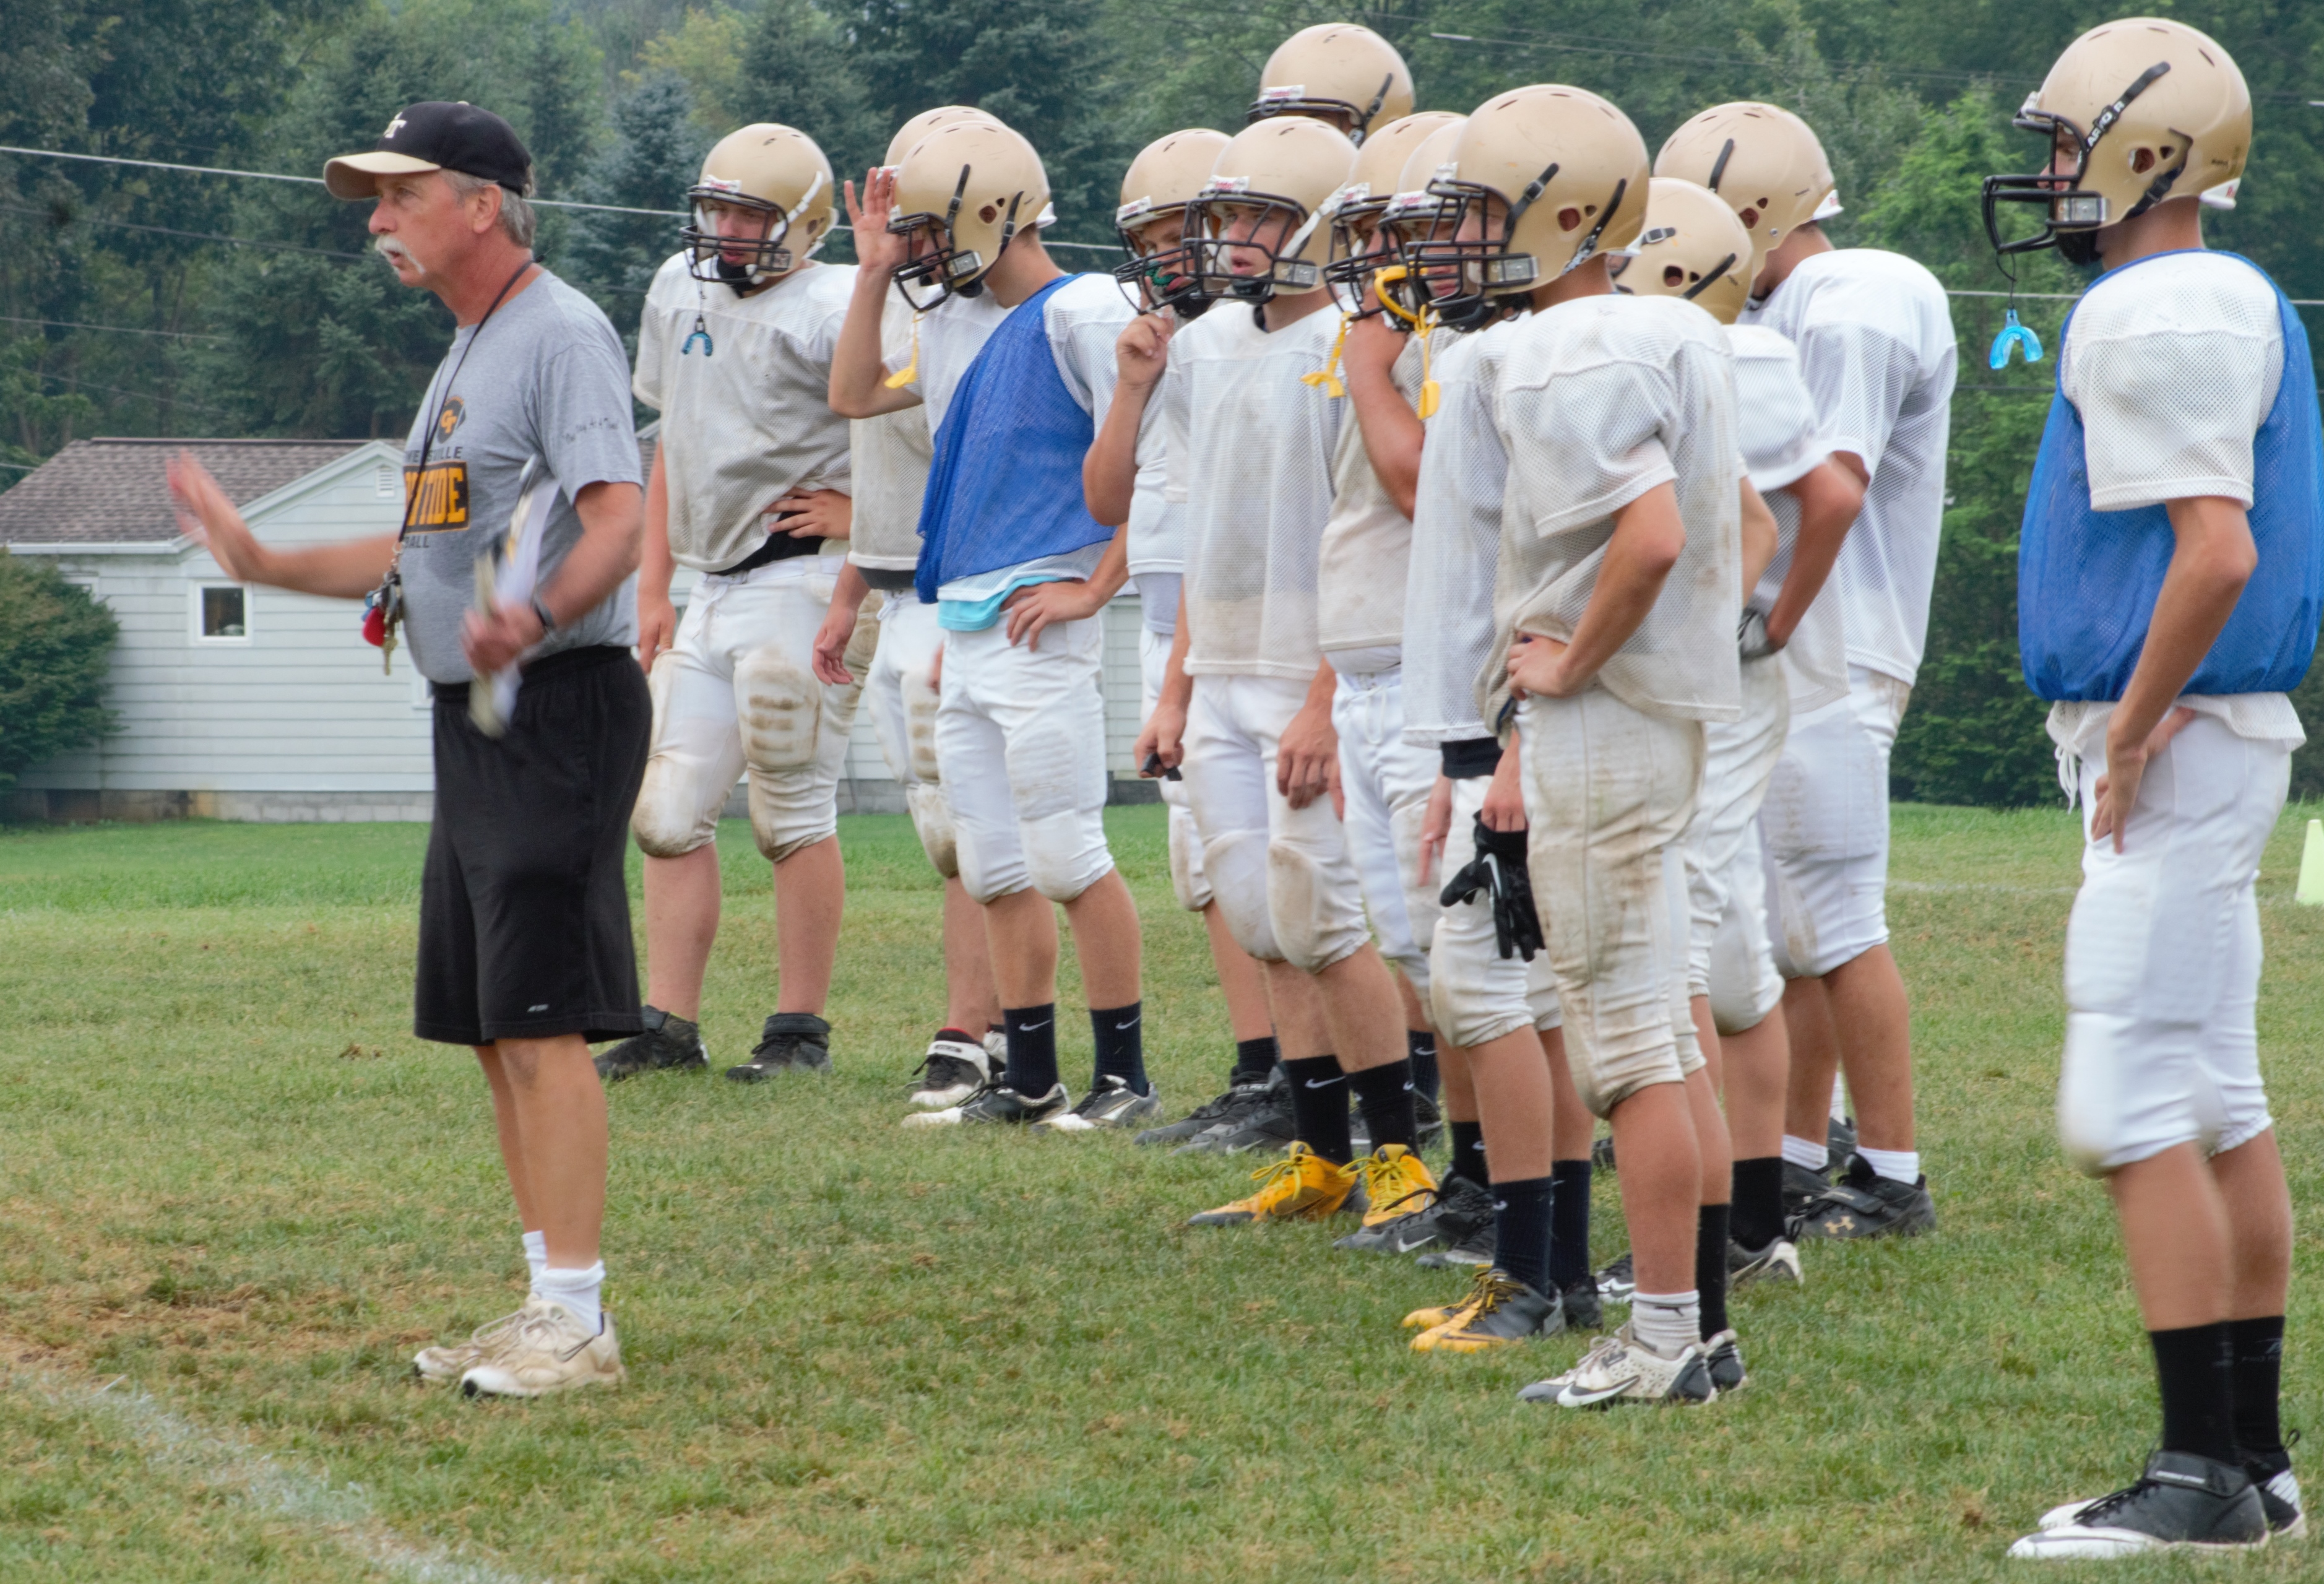 MAKING ADJUSTMENTS during pre-season practices is Curwensville Area head coach Andy Evanko.  (photo by Rusty McCracken)